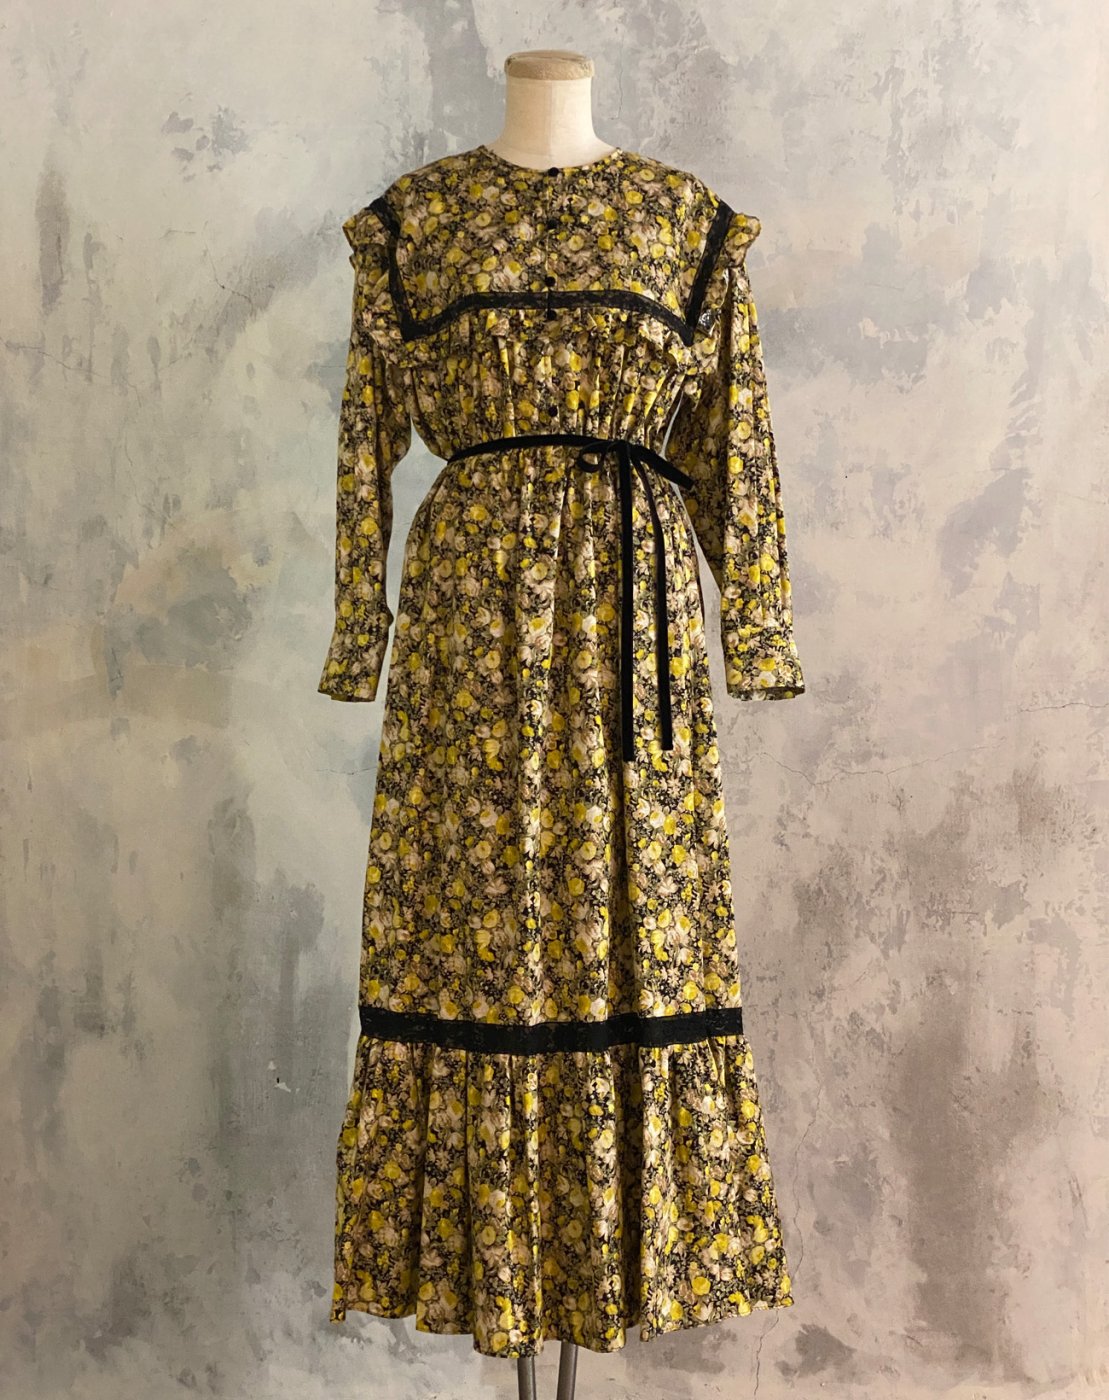 leur logette - <img class='new_mark_img1' src='https://img.shop-pro.jp/img/new/icons2.gif' style='border:none;display:inline;margin:0px;padding:0px;width:auto;' />Matisse Flower Print Dress - Yellow